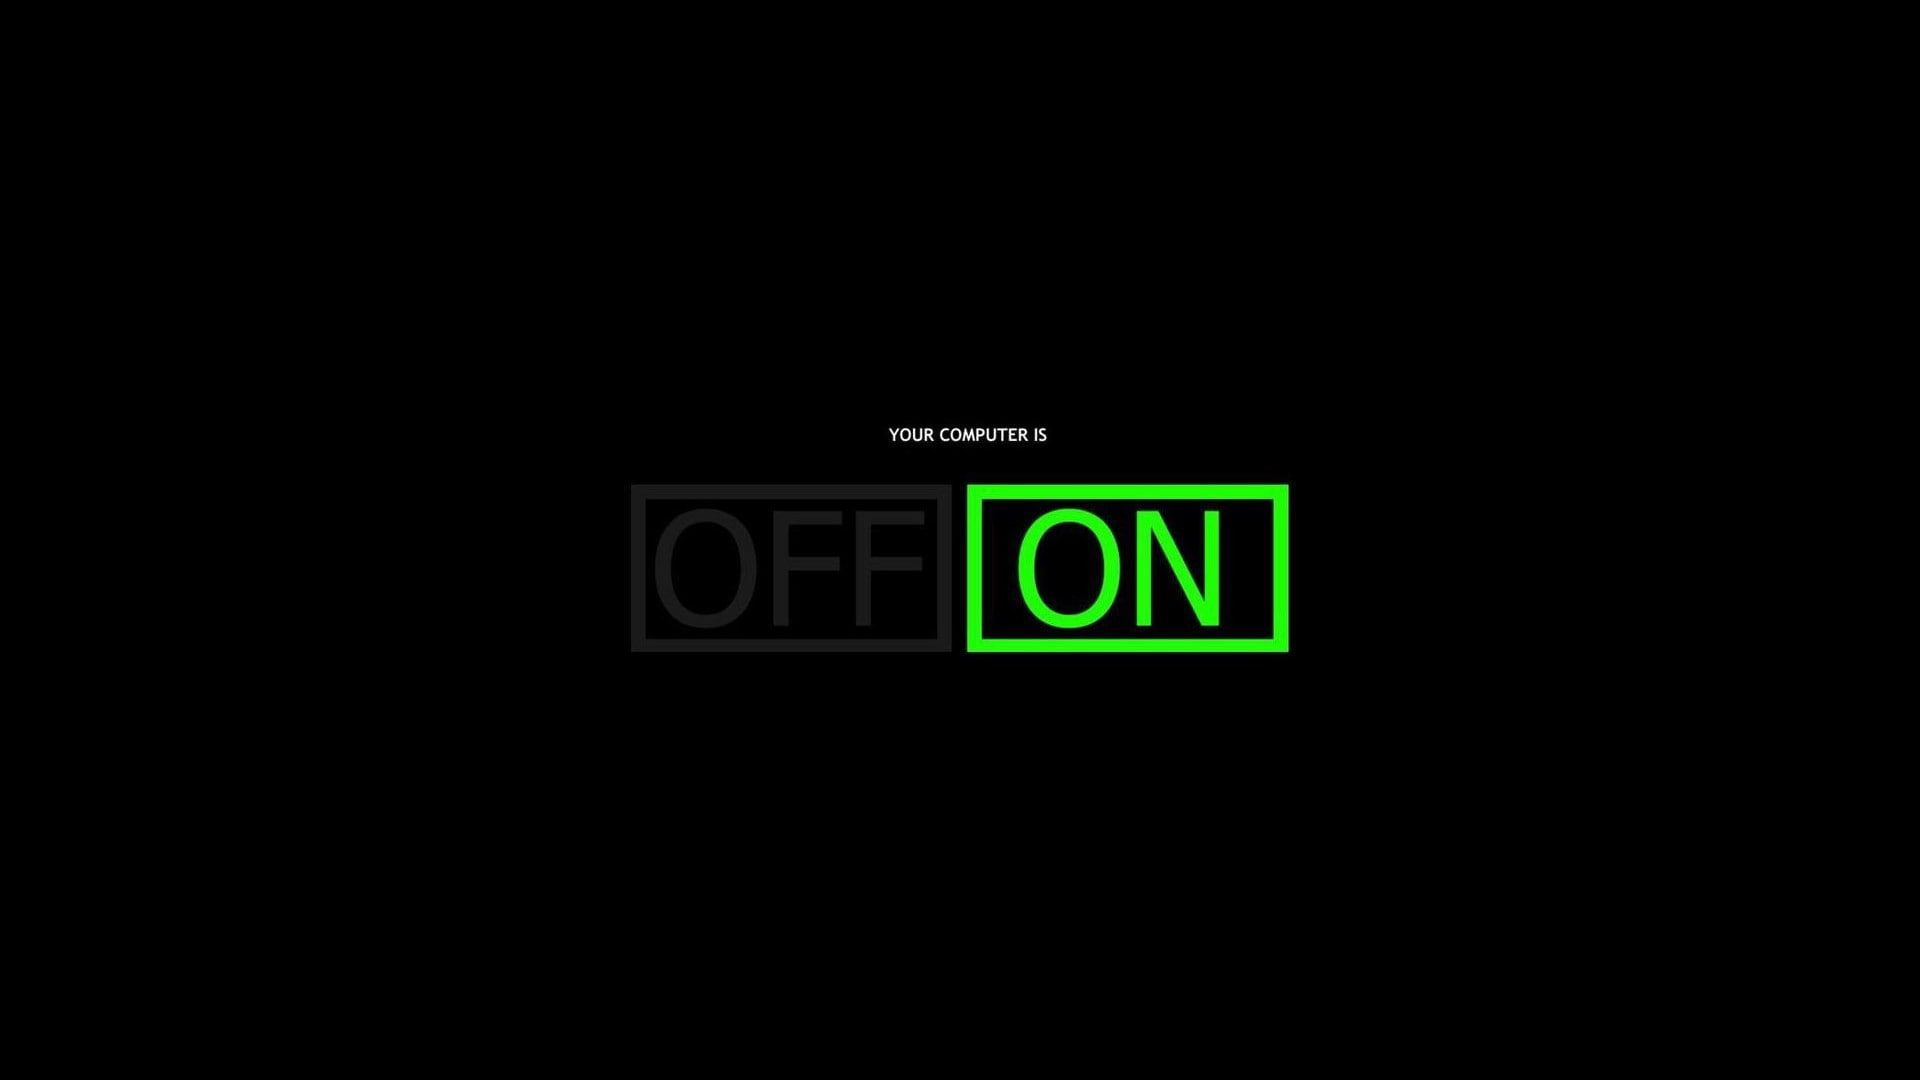 off on-printed text, minimalism, dark, black, computer, selective coloring